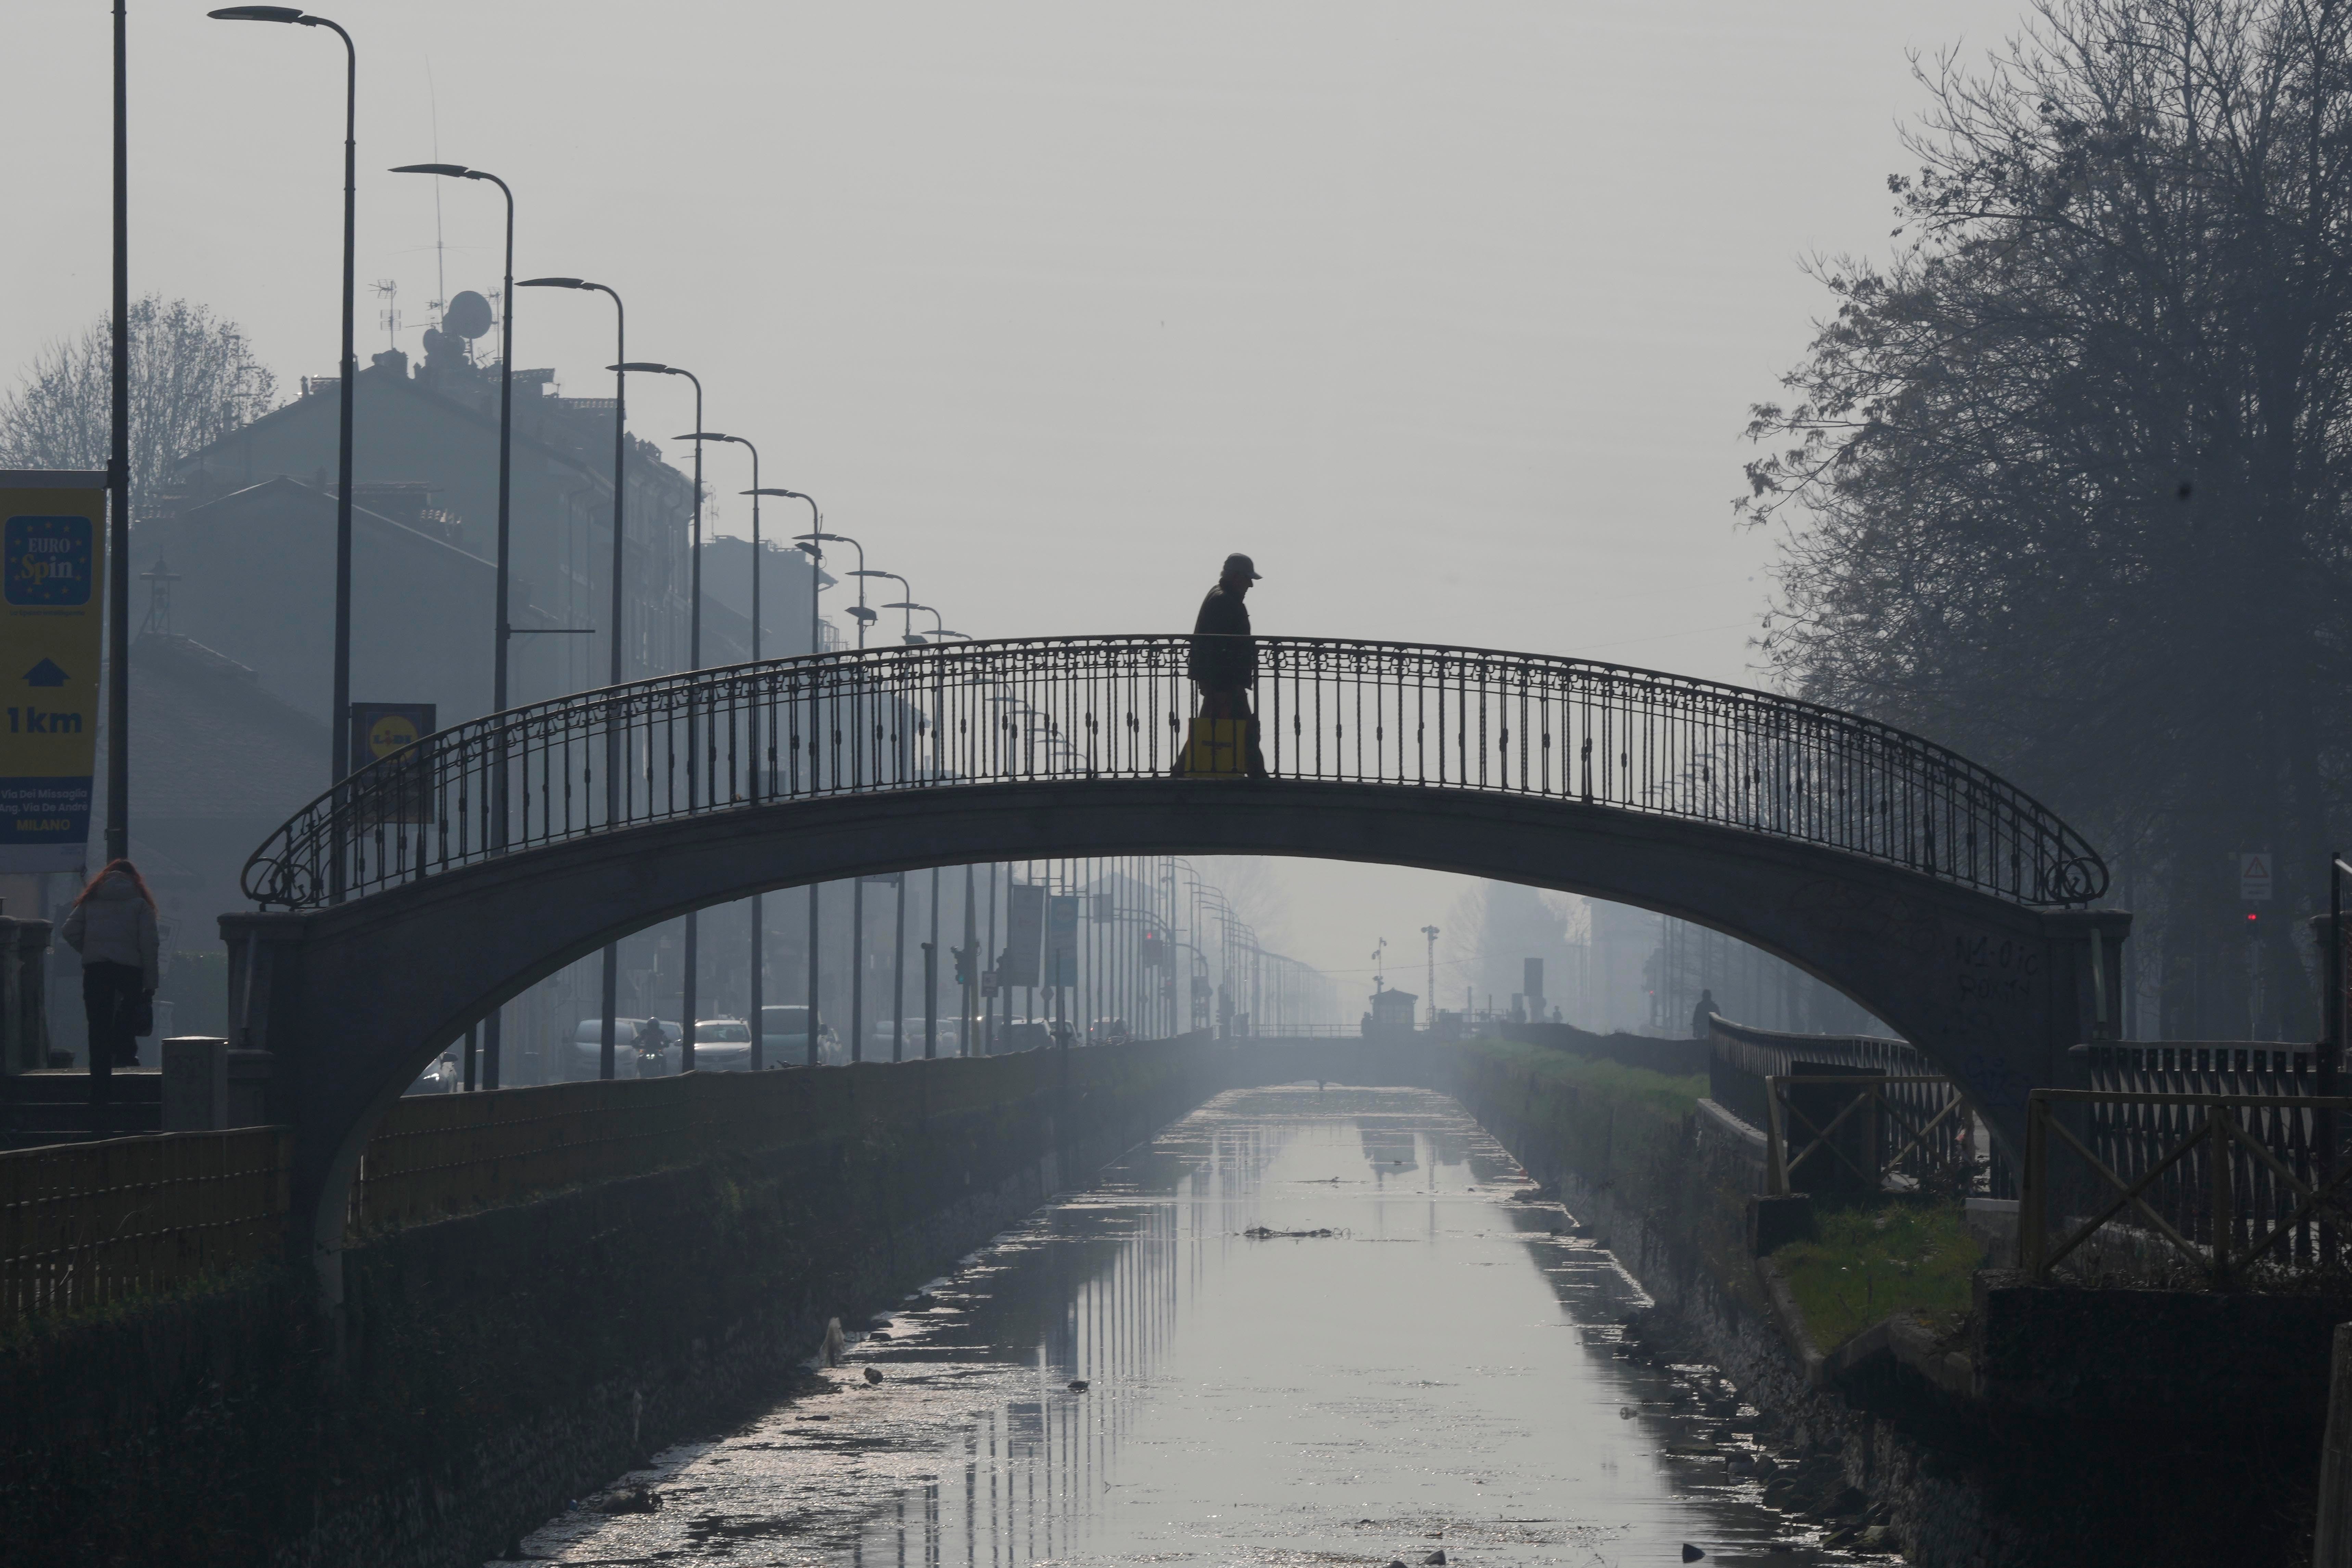 A man walks on a bridge shrouded in mist and smog, at the Naviglio Pavese canal in Milan, Italy on Monday